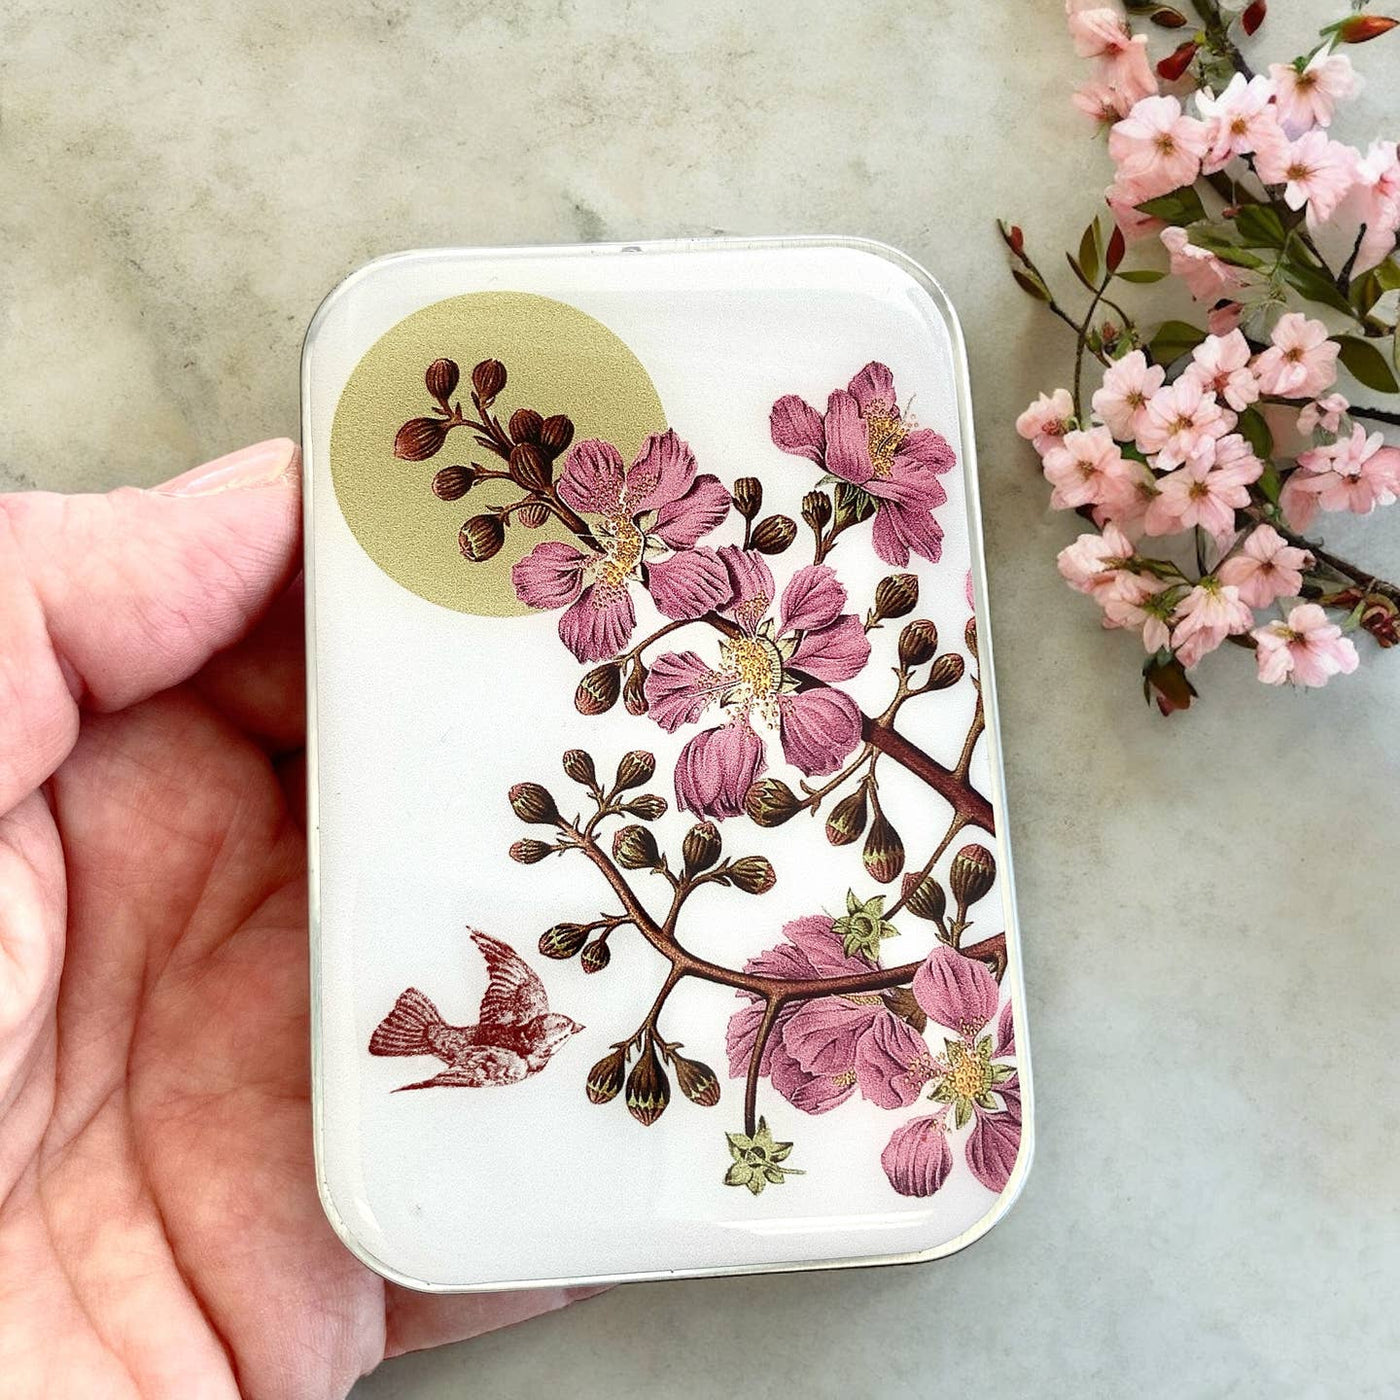 Firefly Notes - Cherry Blossom Stitch Marker Tin: Large